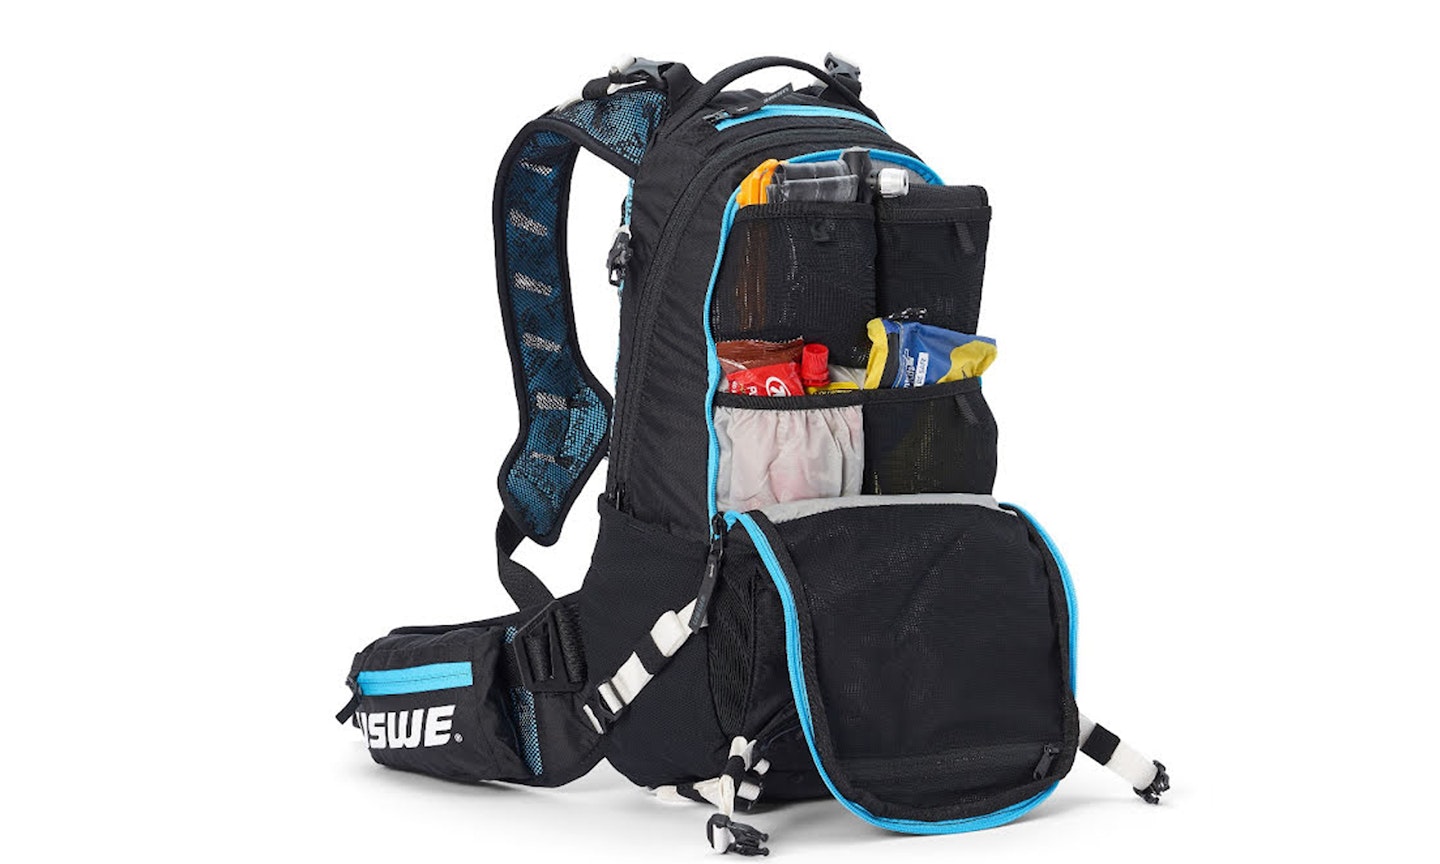 USWE Flow 16 hydration backpack main compartment